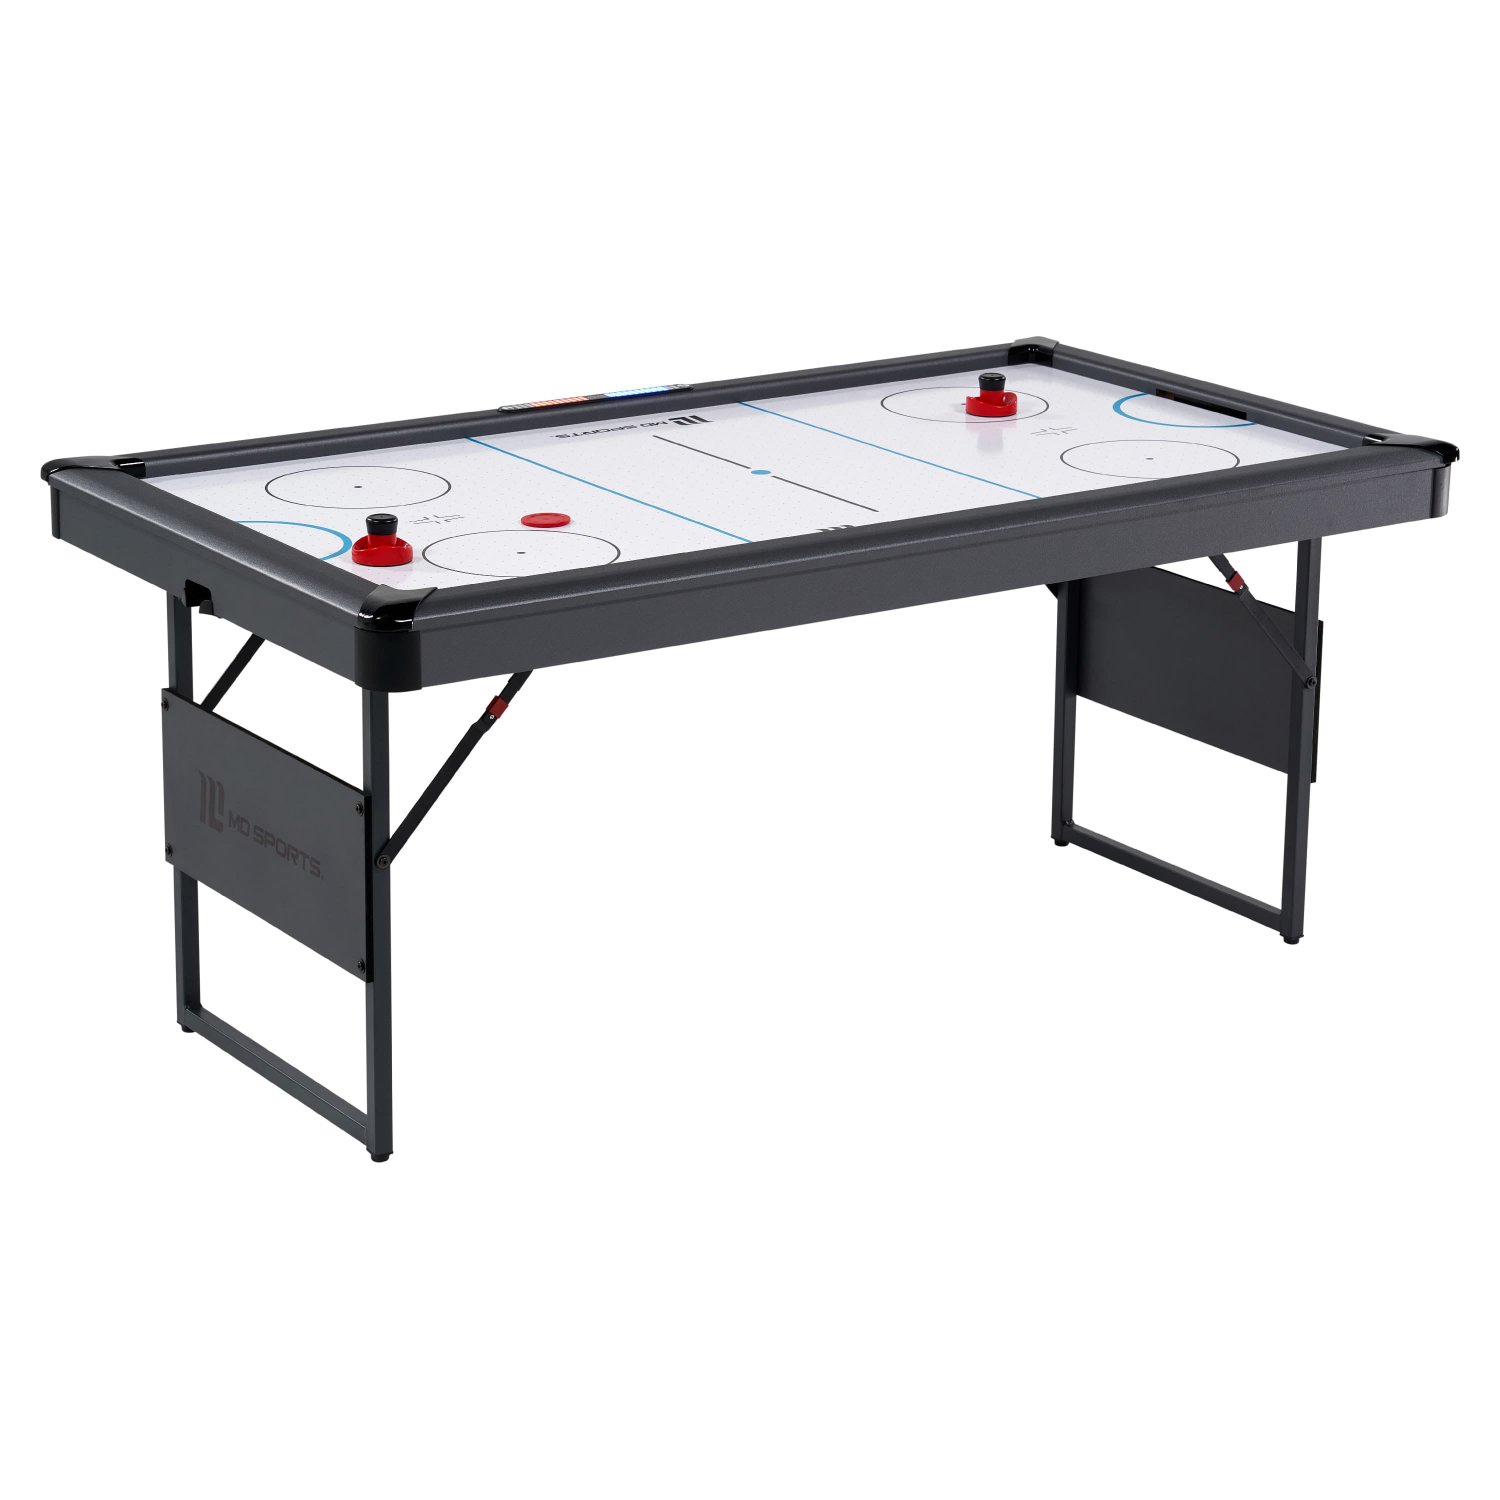 MD Sports 66" Foldable Powered Air Hockey Table Set